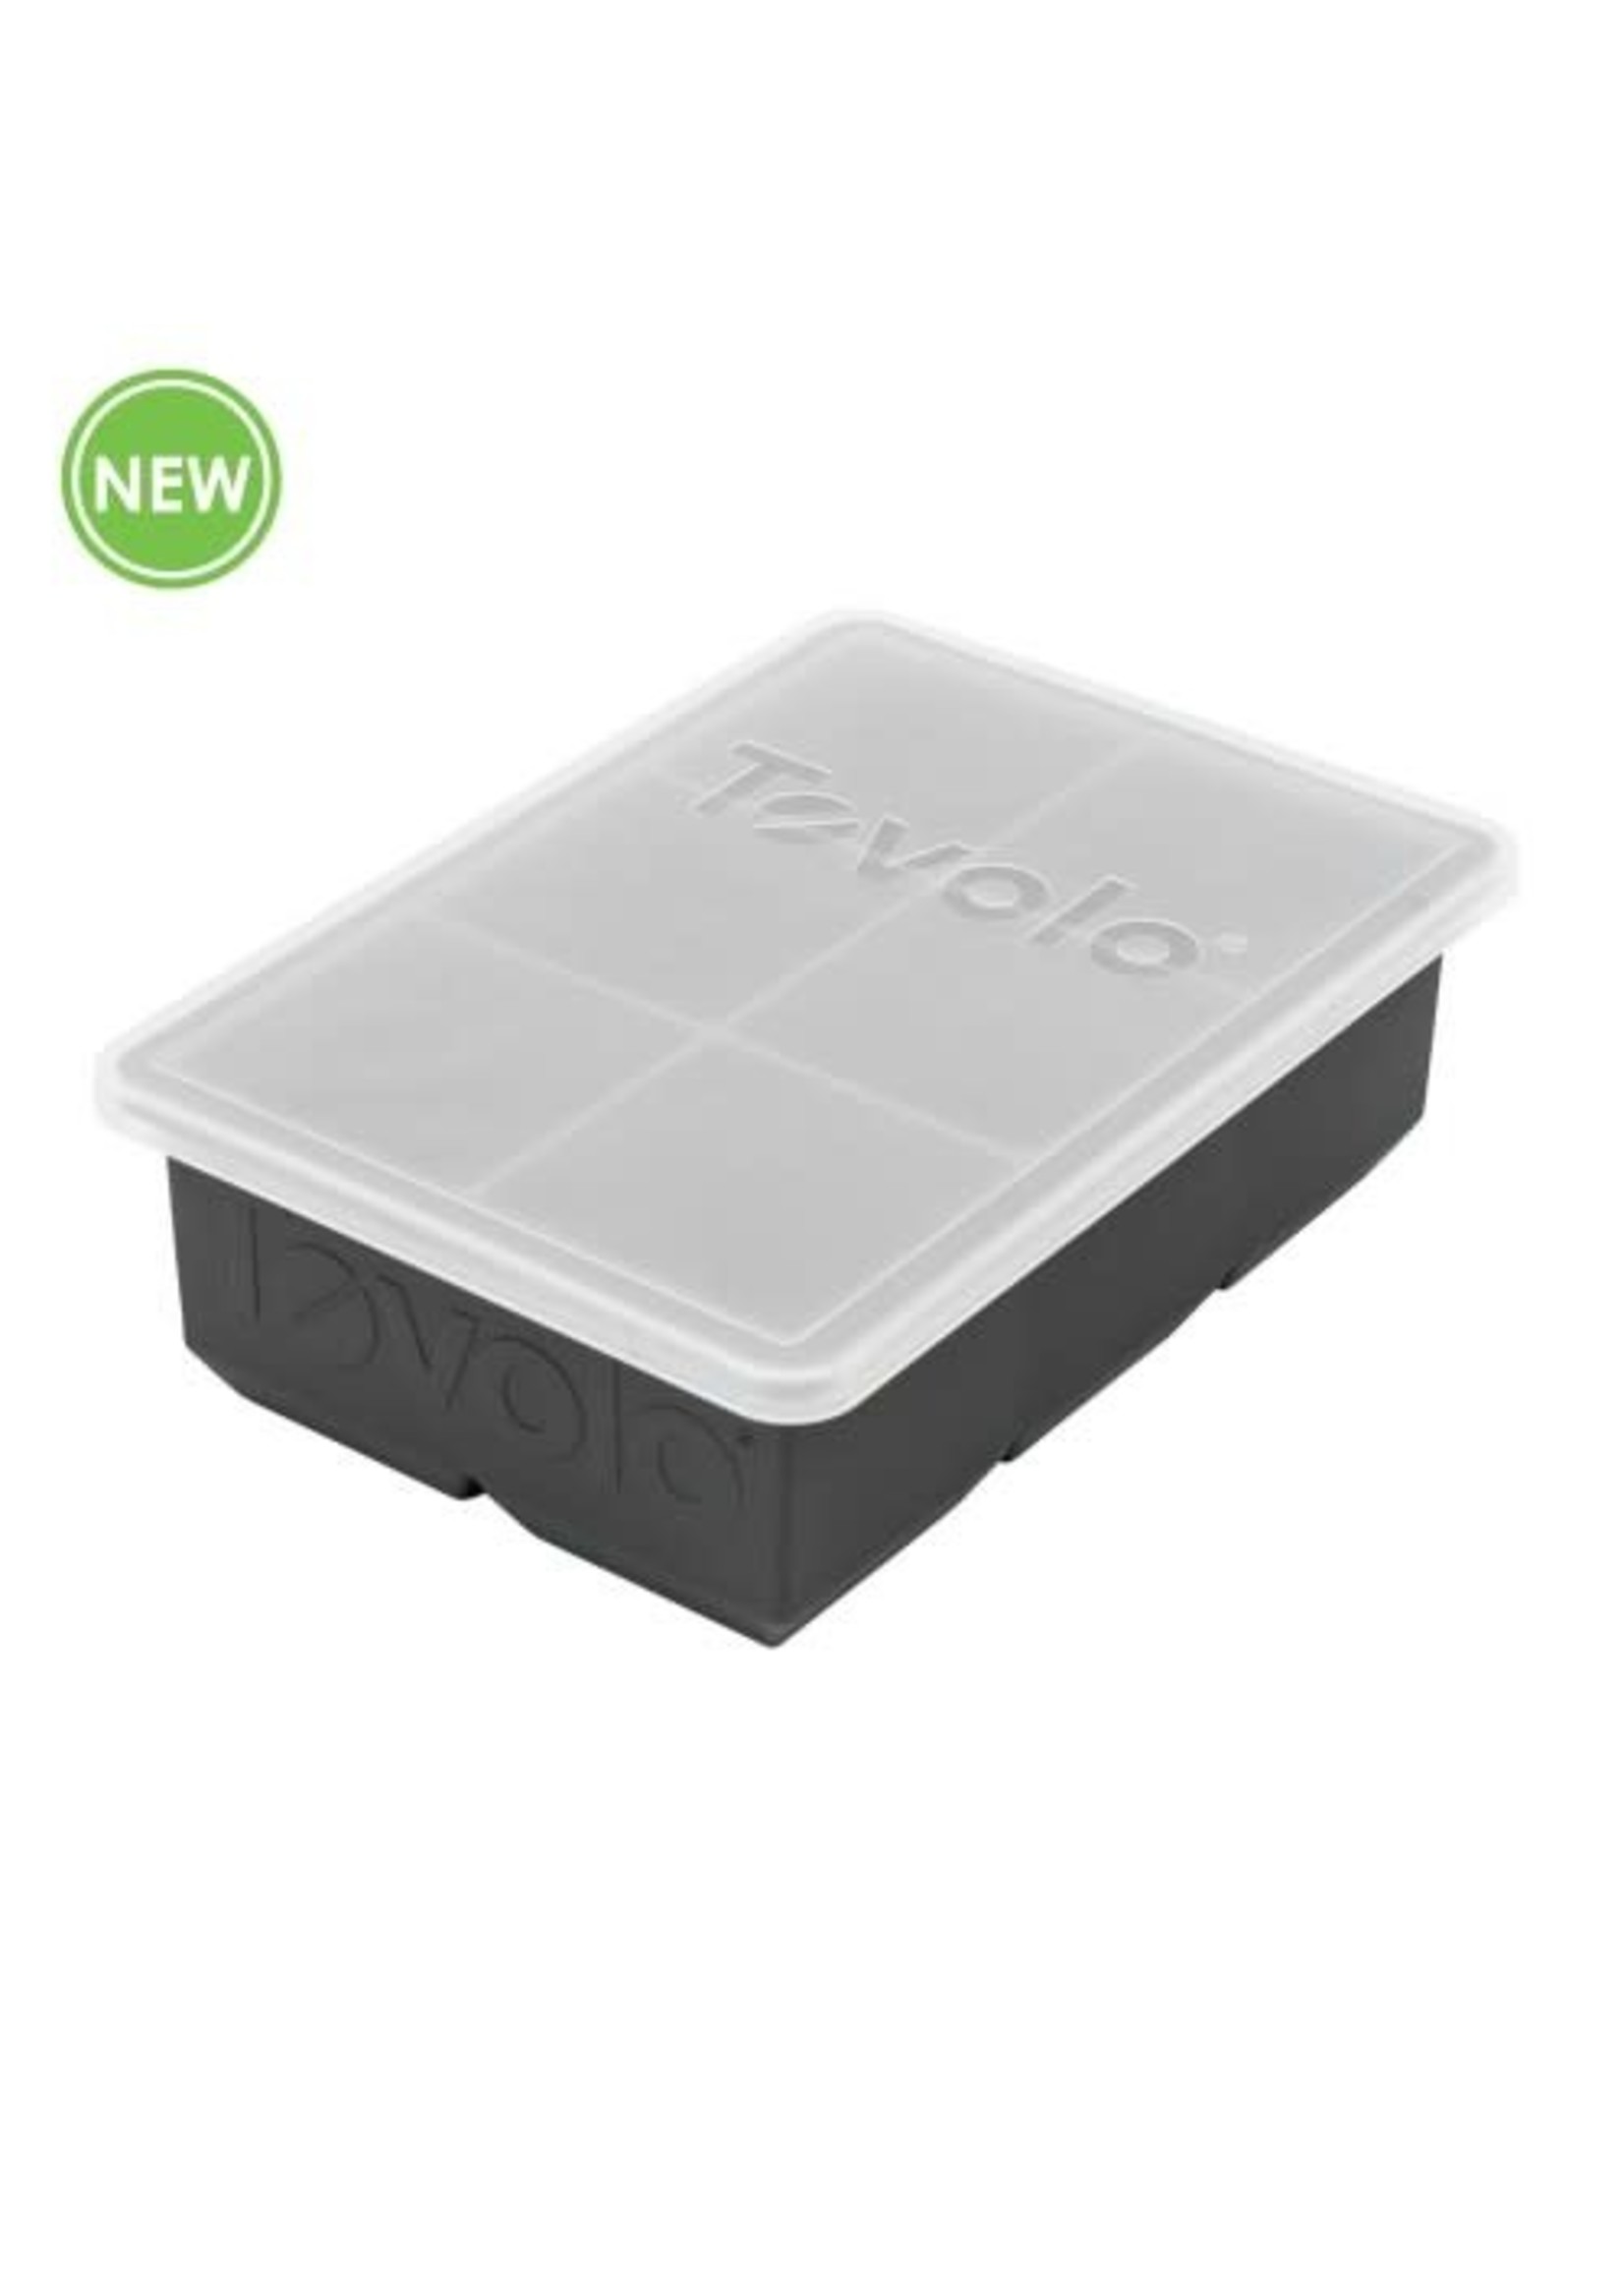 Tovolo King Cube Ice Tray w/ Charcoal Lid